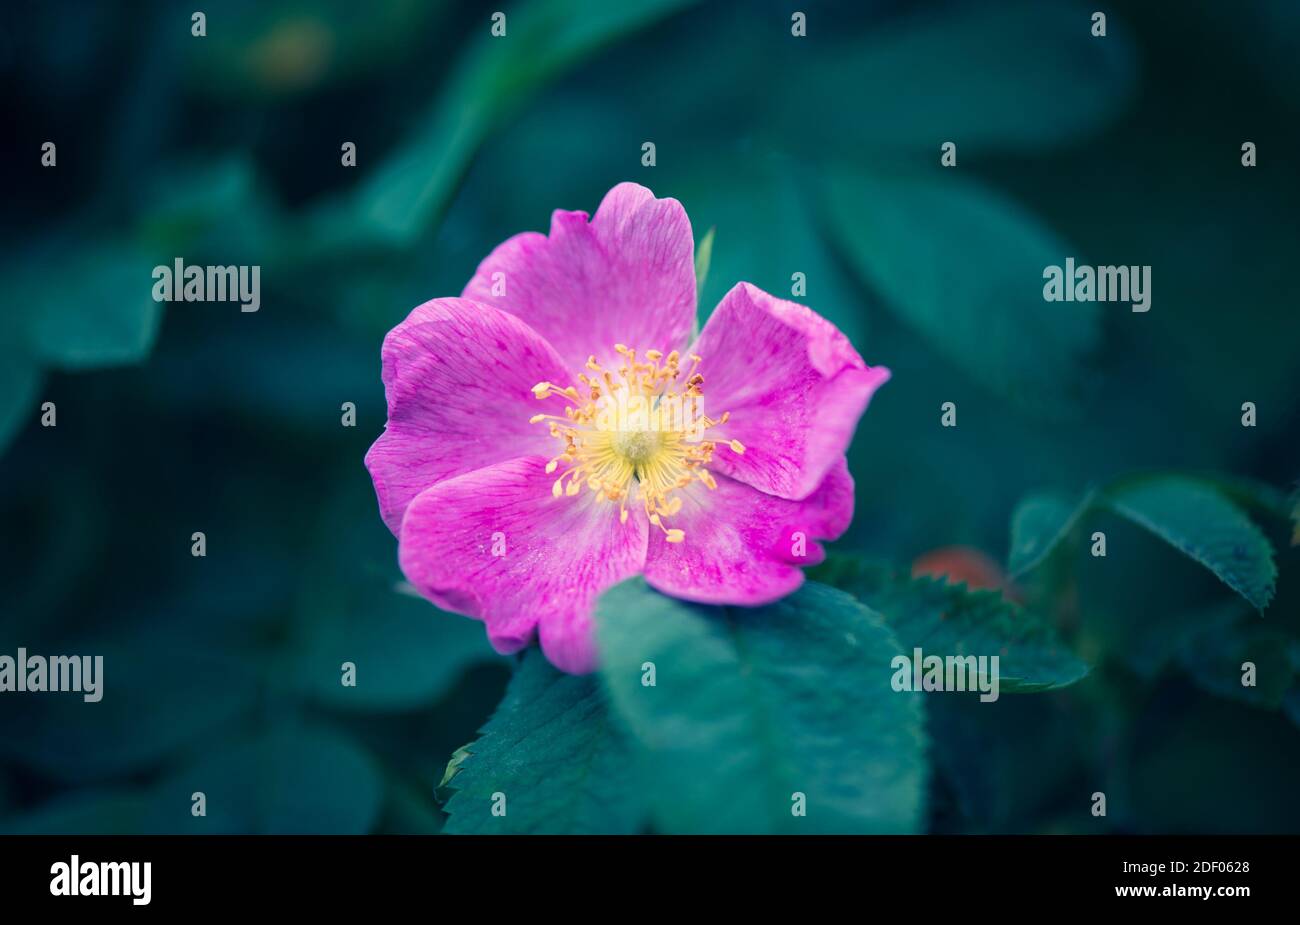 Pink rosehip flower stands out against a dark green background of greenery. The beauty in nature.  Stock Photo